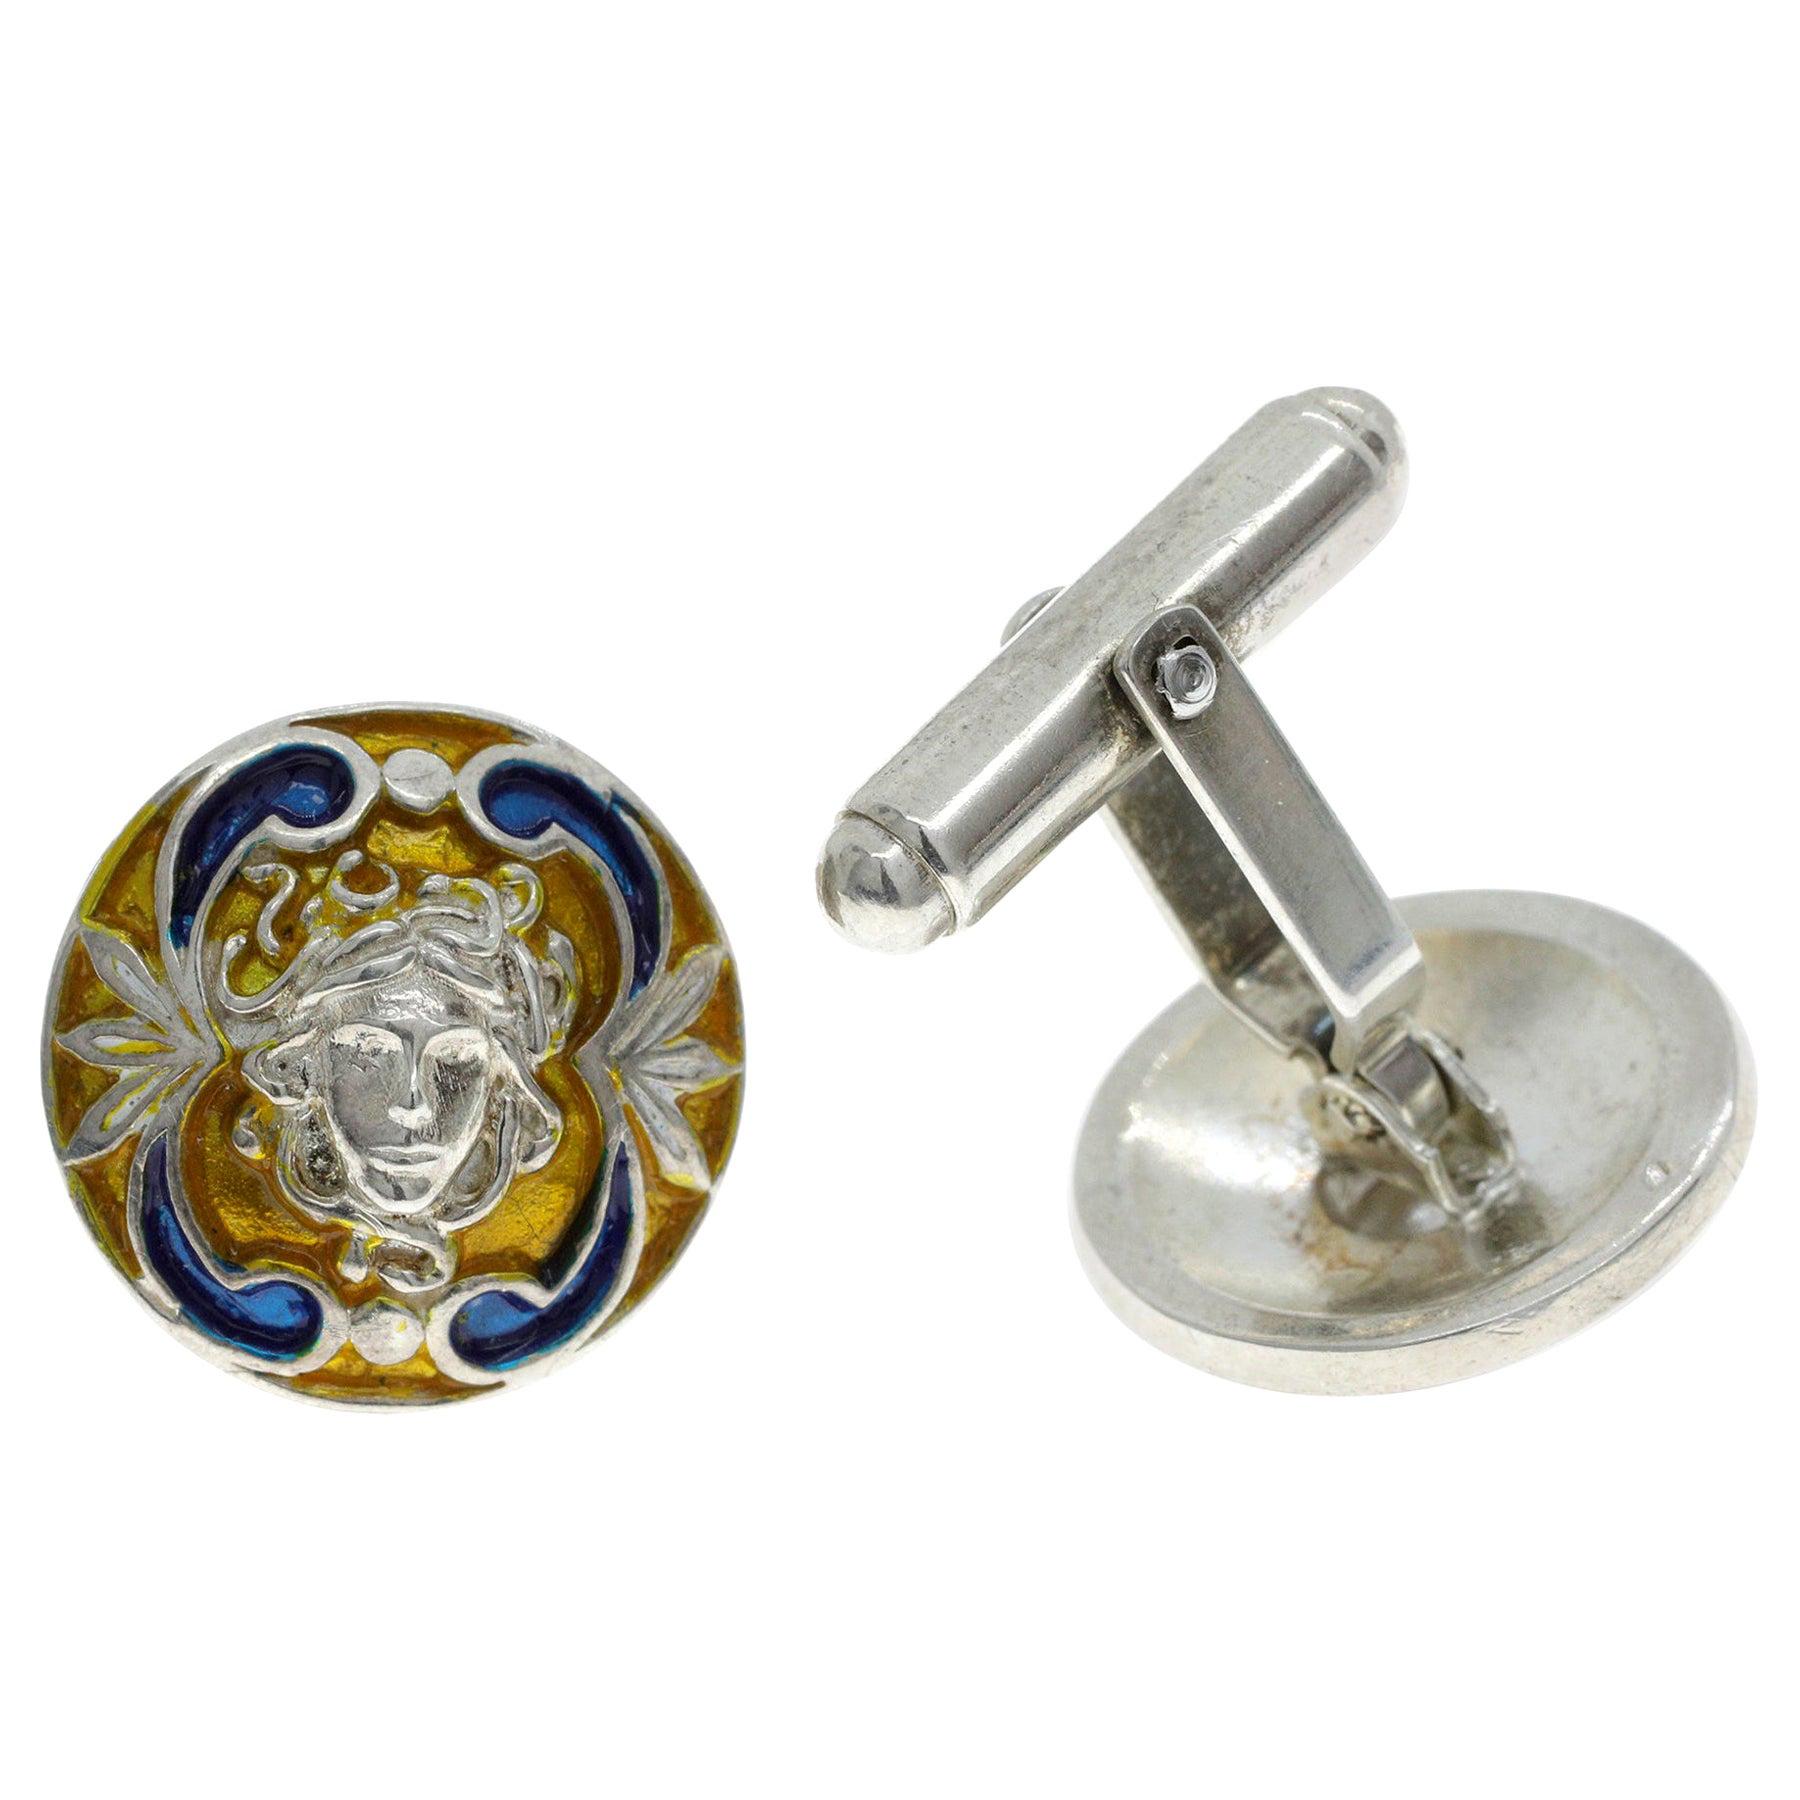 21st Century .925 Silver Enamelled in Gold and Blue "Medusa" Cufflinks